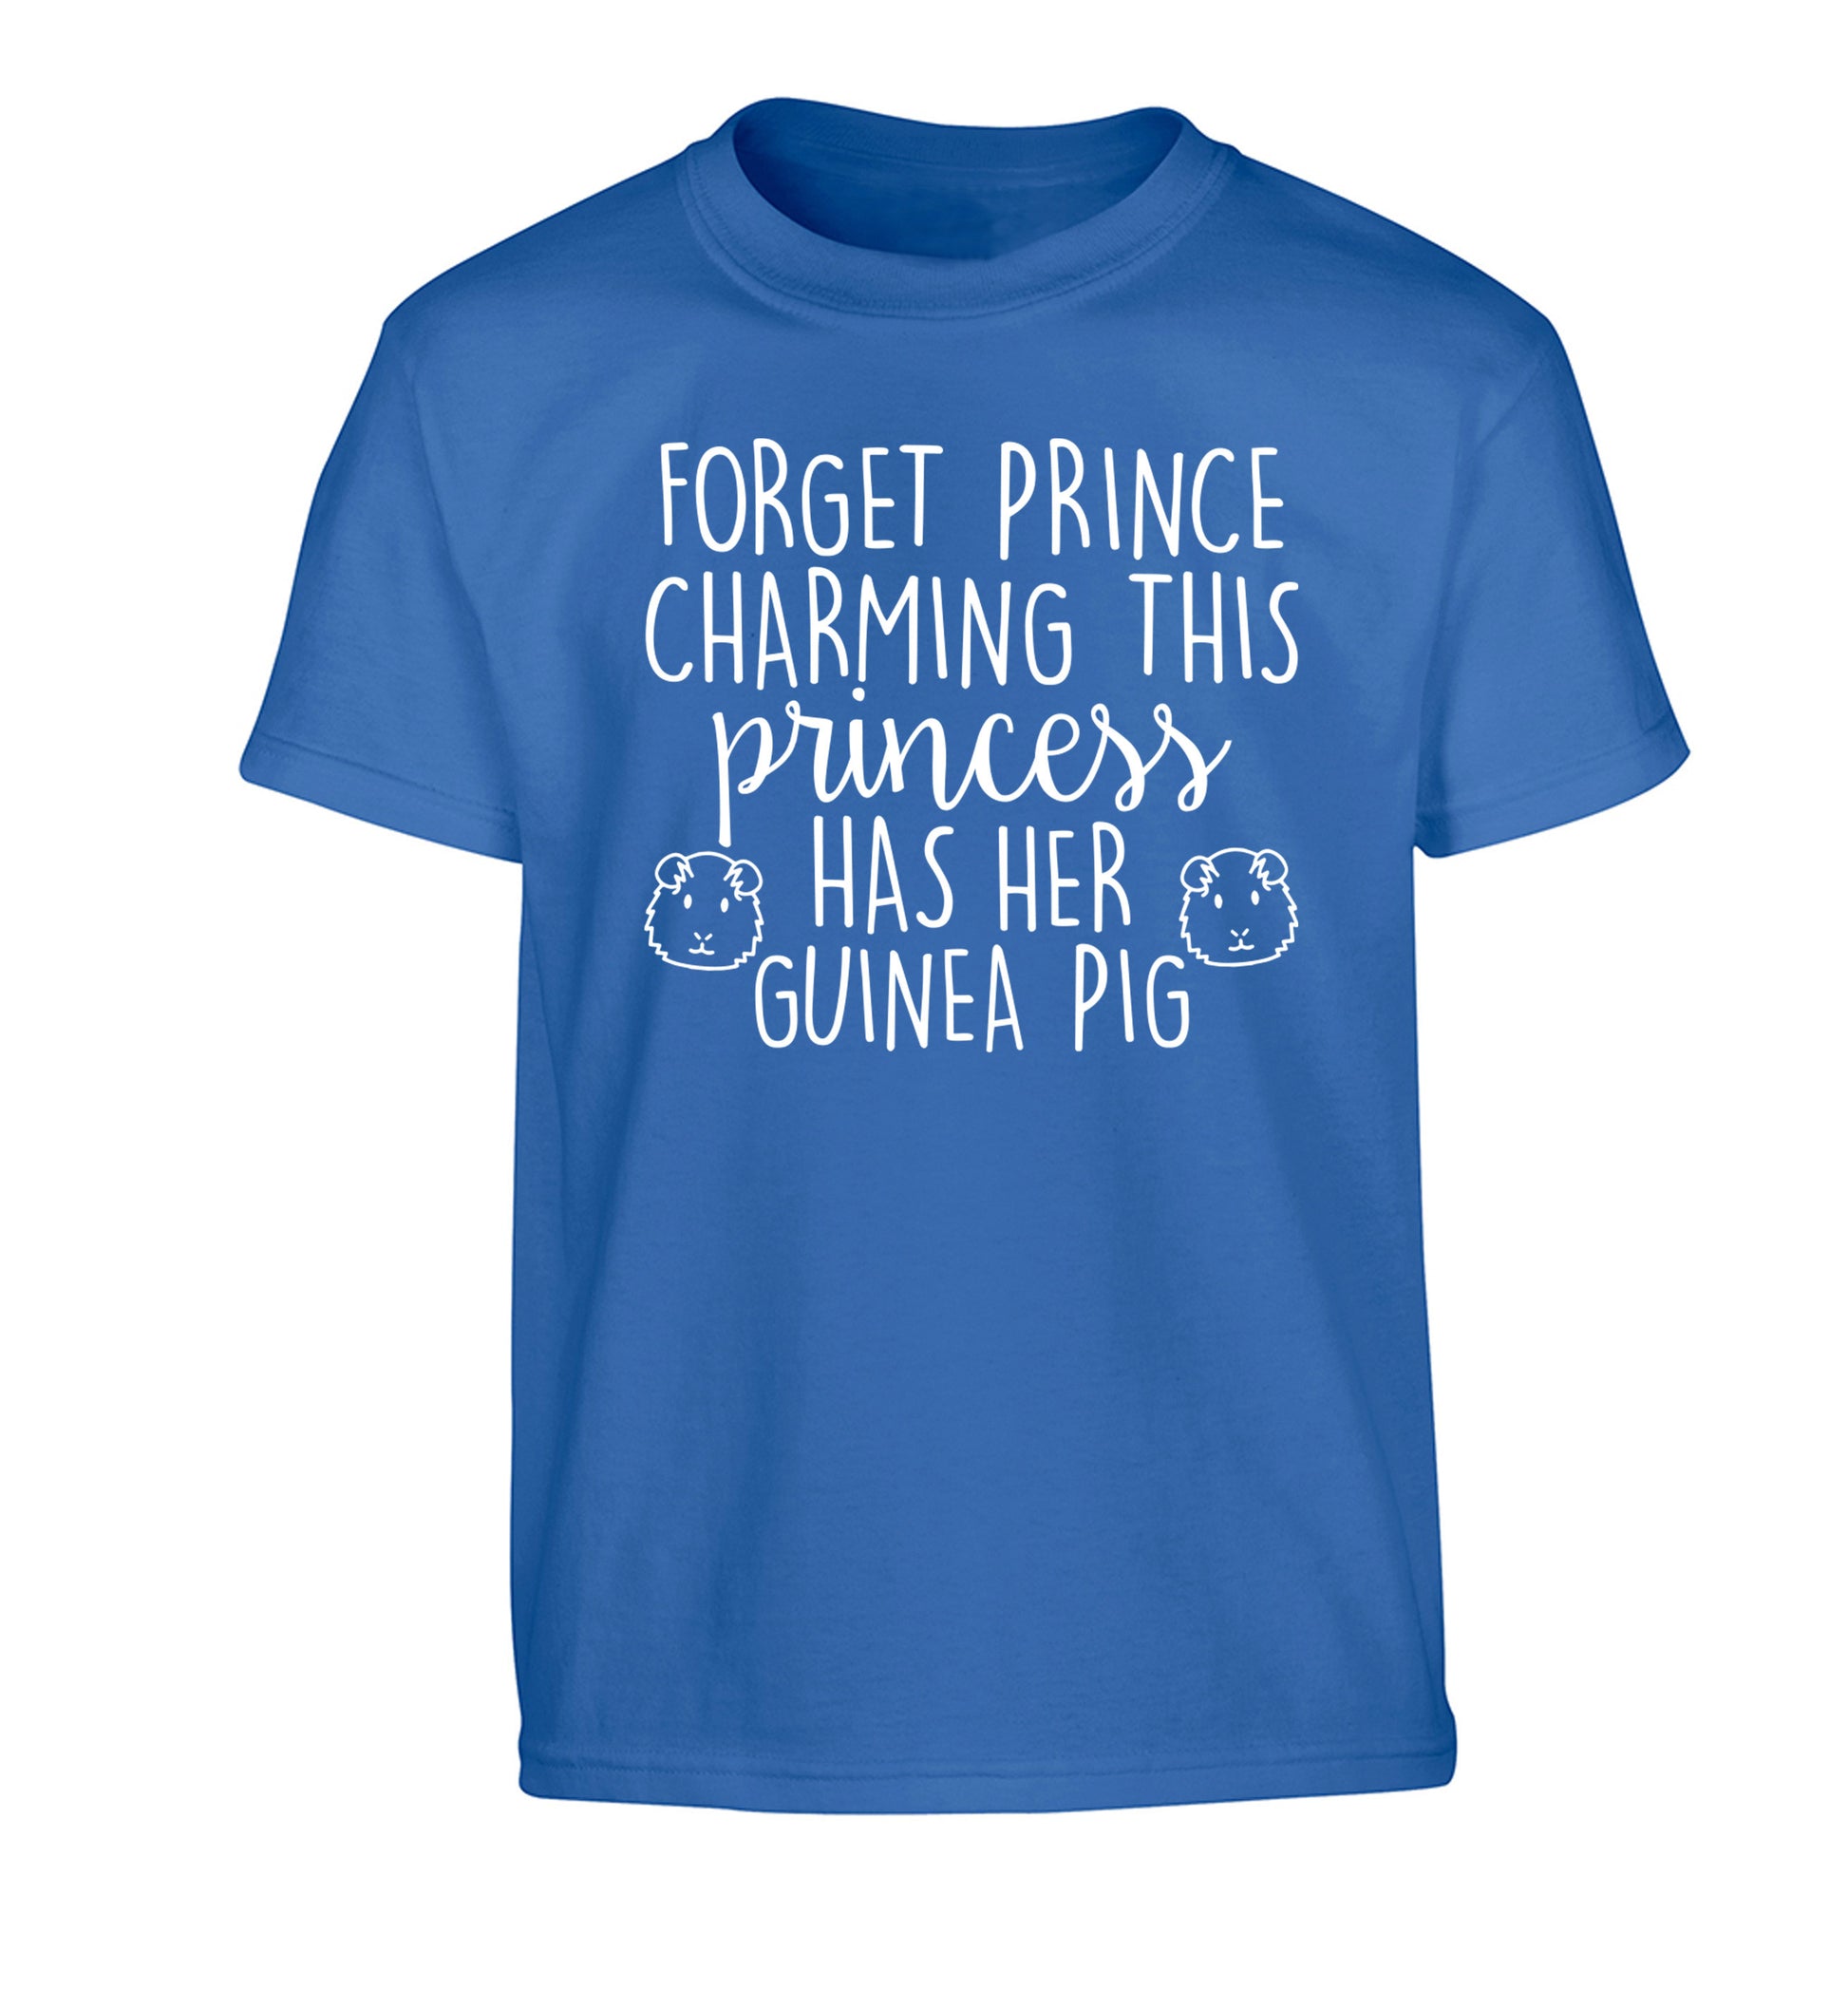 Forget prince charming, I have my guinea pig Children's blue Tshirt 12-14 Years